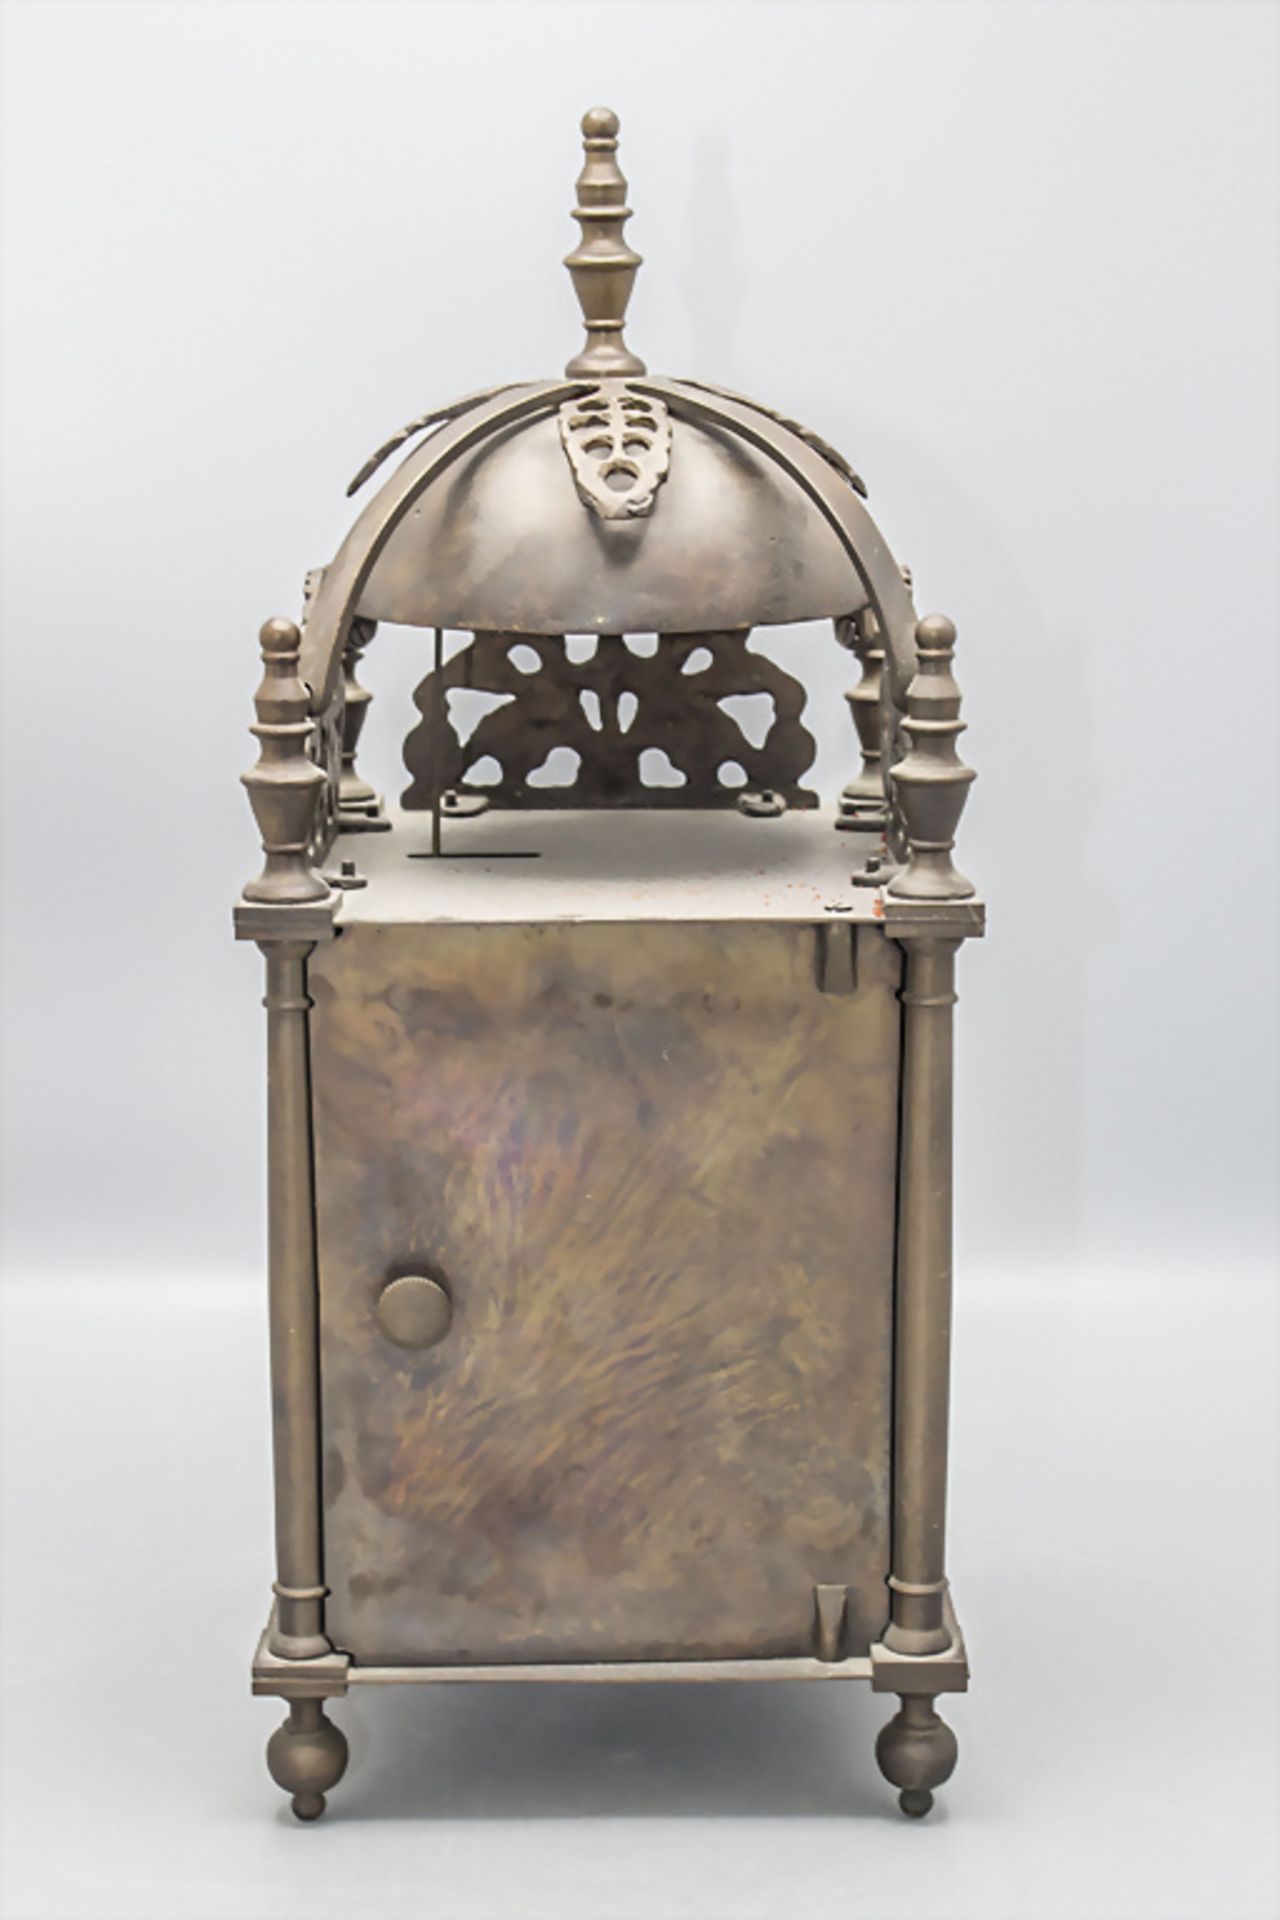 Laternenuhr / A latern clock, 20. Jh. - Image 5 of 7